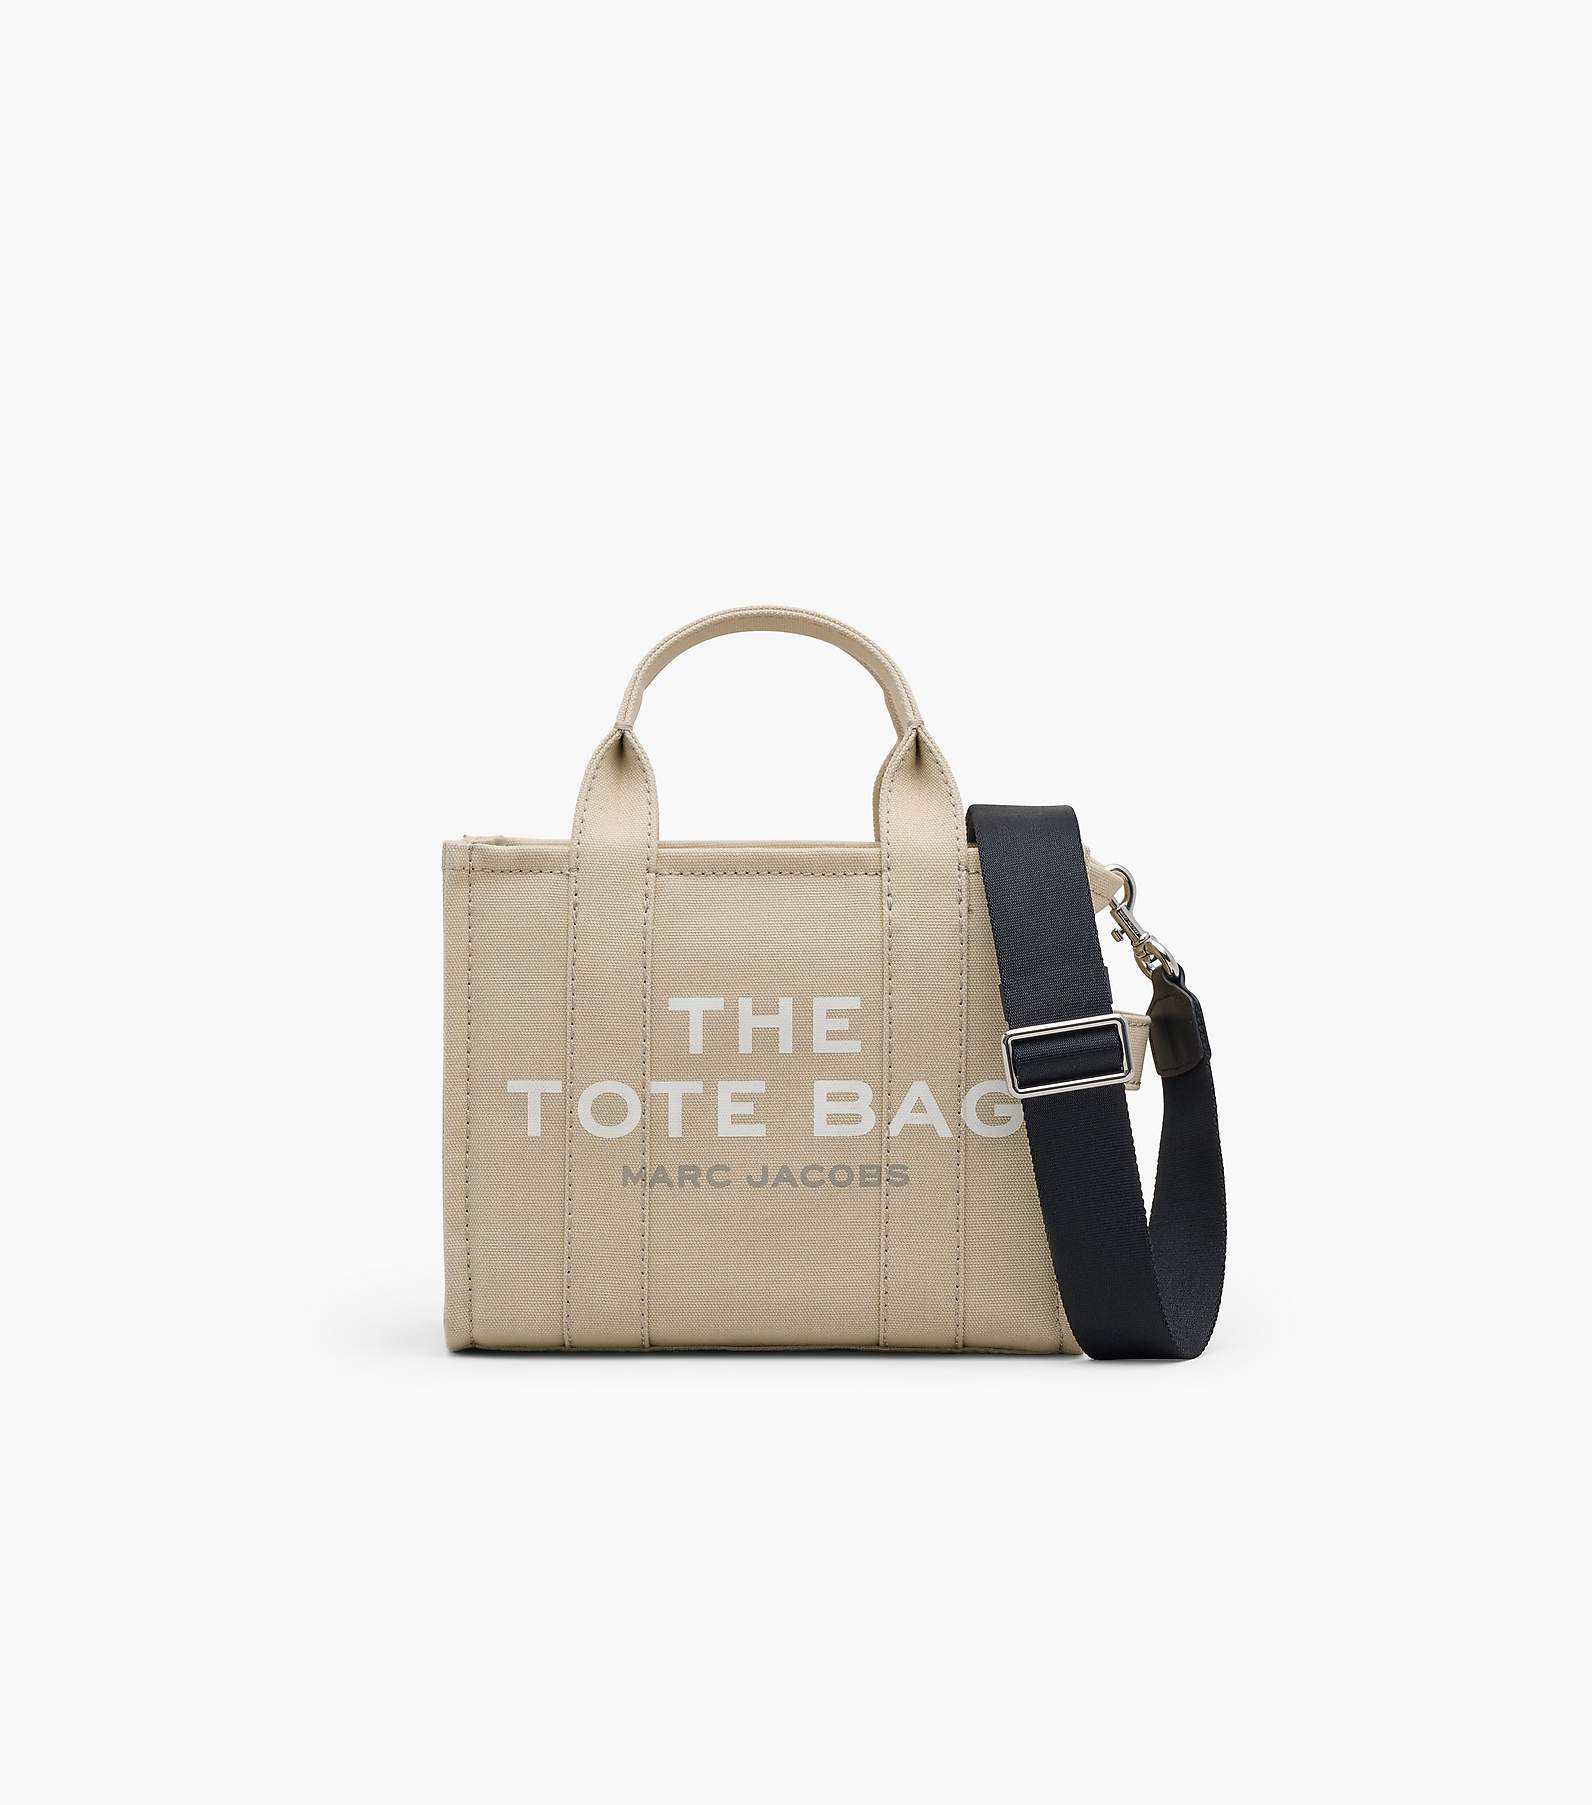 The Small Tote Bag(The Tote Bag)